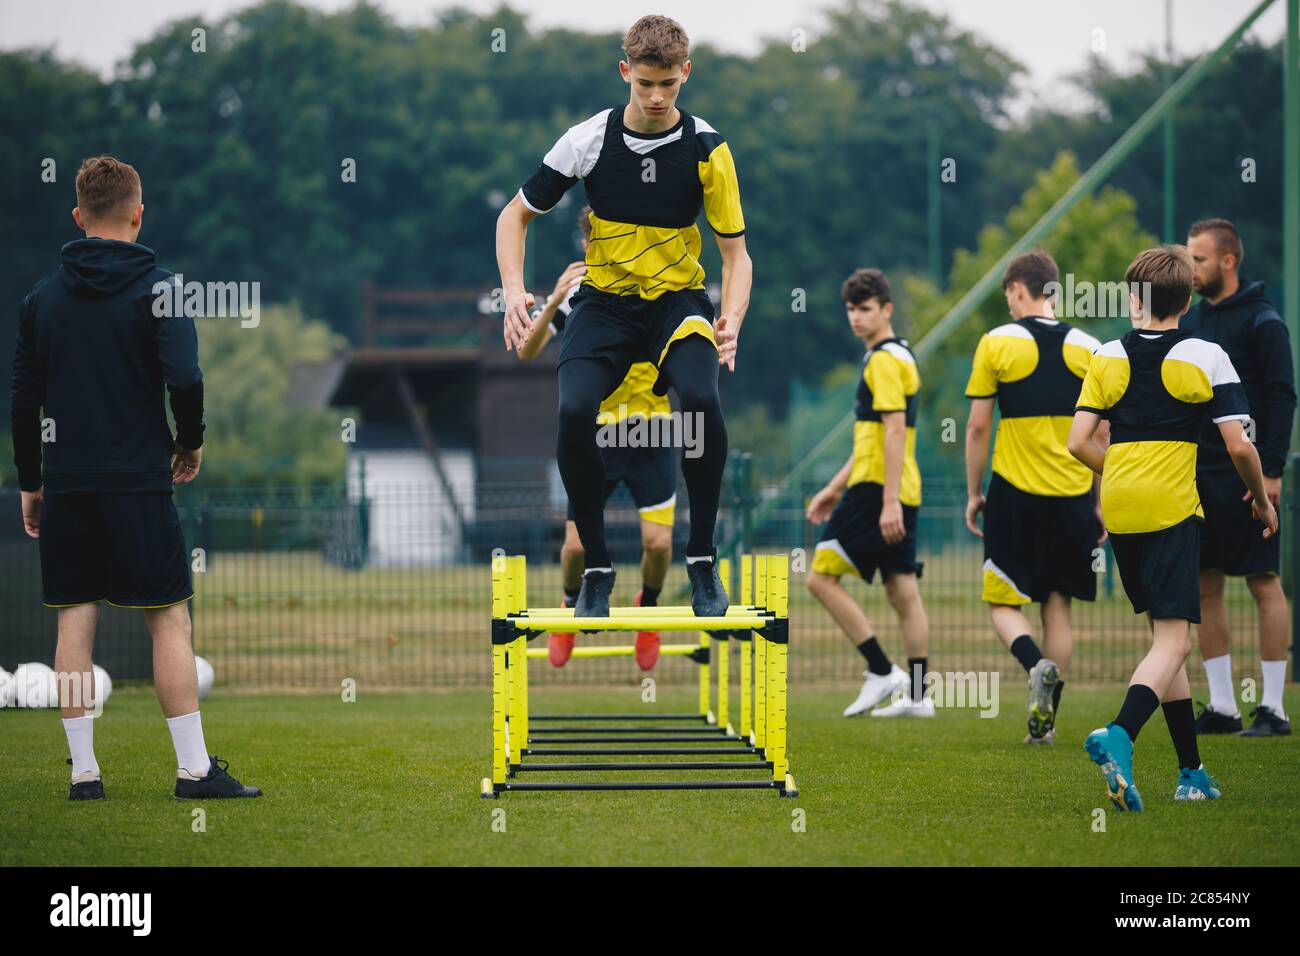 Soccer training drills with hurdles agility. Football players jumping high over hurdles obstacles. Footballers in a team on practice pitch. Two coache Stock Photo